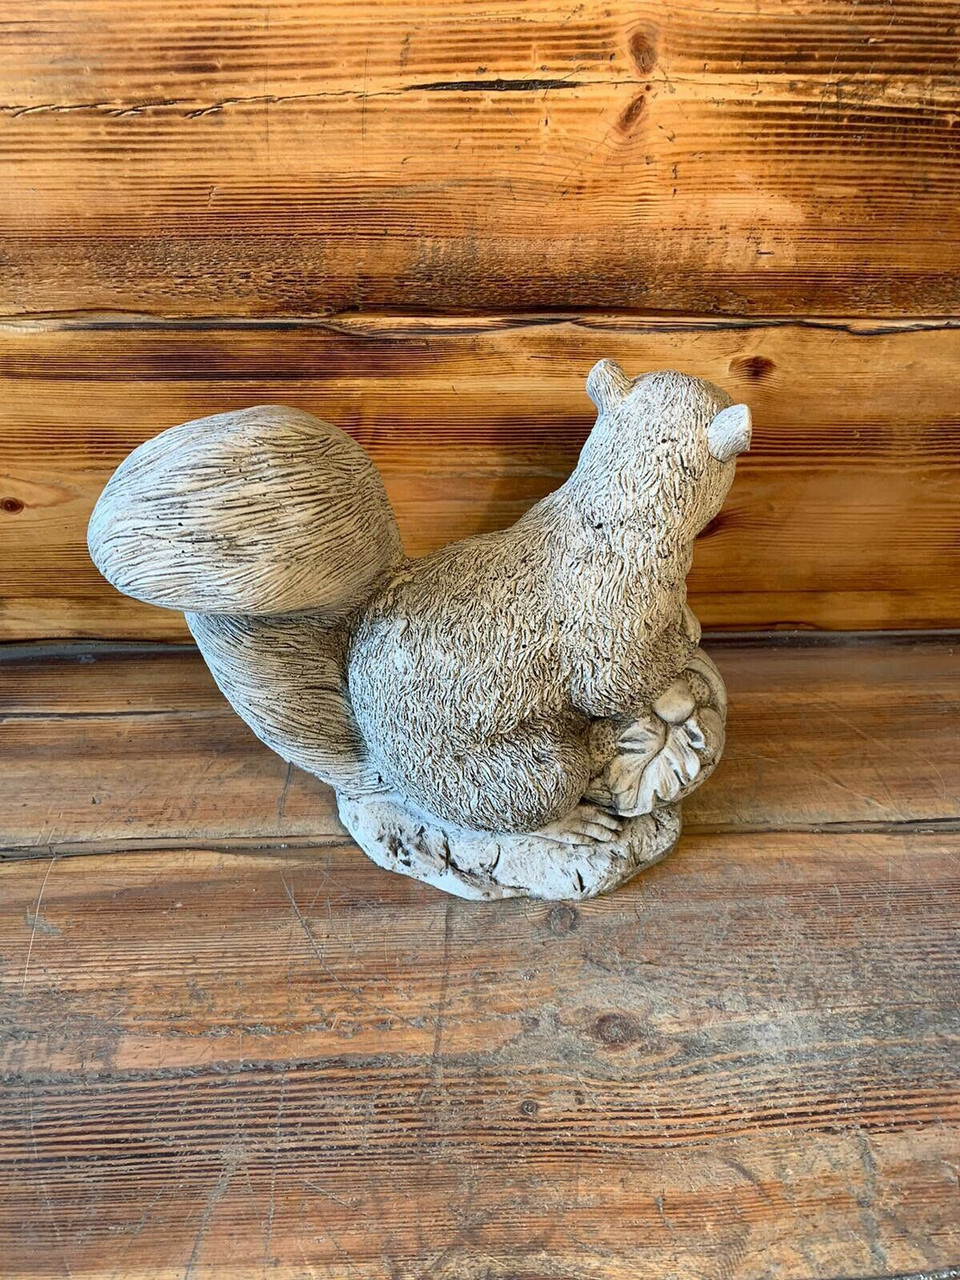 STONE GARDEN LARGE SQUIRREL WITH BASKET STATUE ORNAMENT